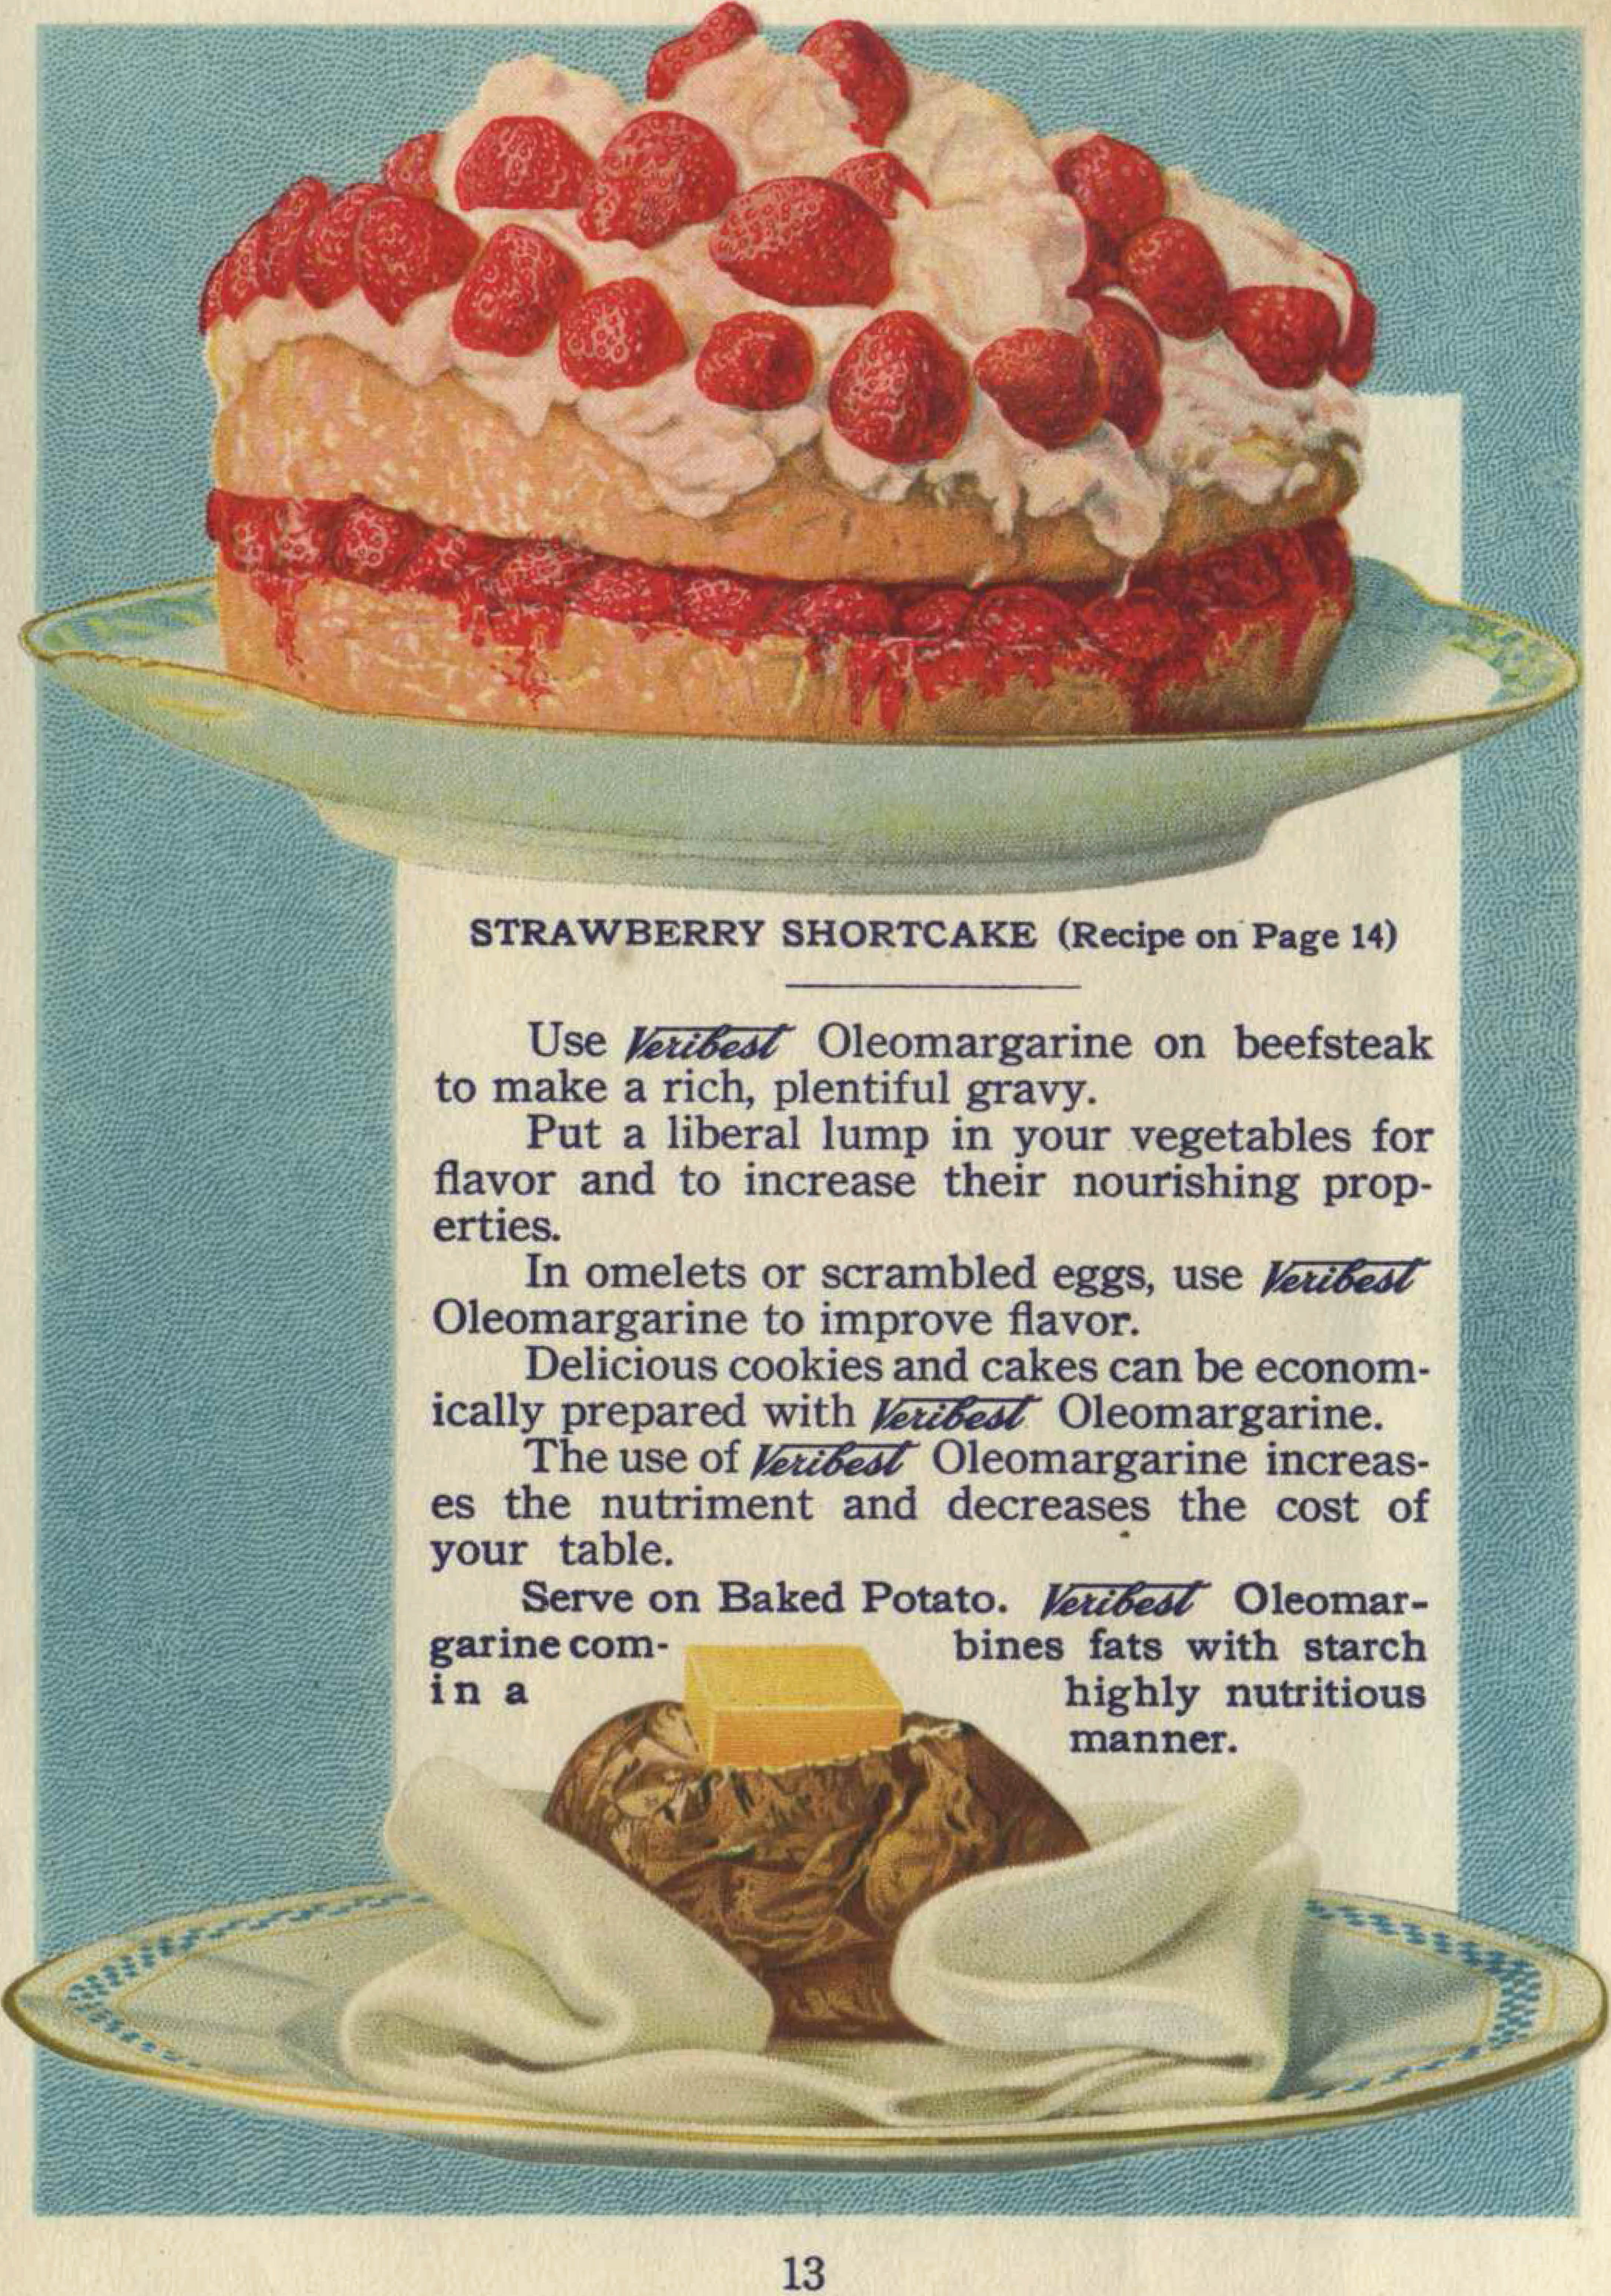 Color illustrations of strawberry shortcake and a baked potato in a pamphlet for cooking with margarine.